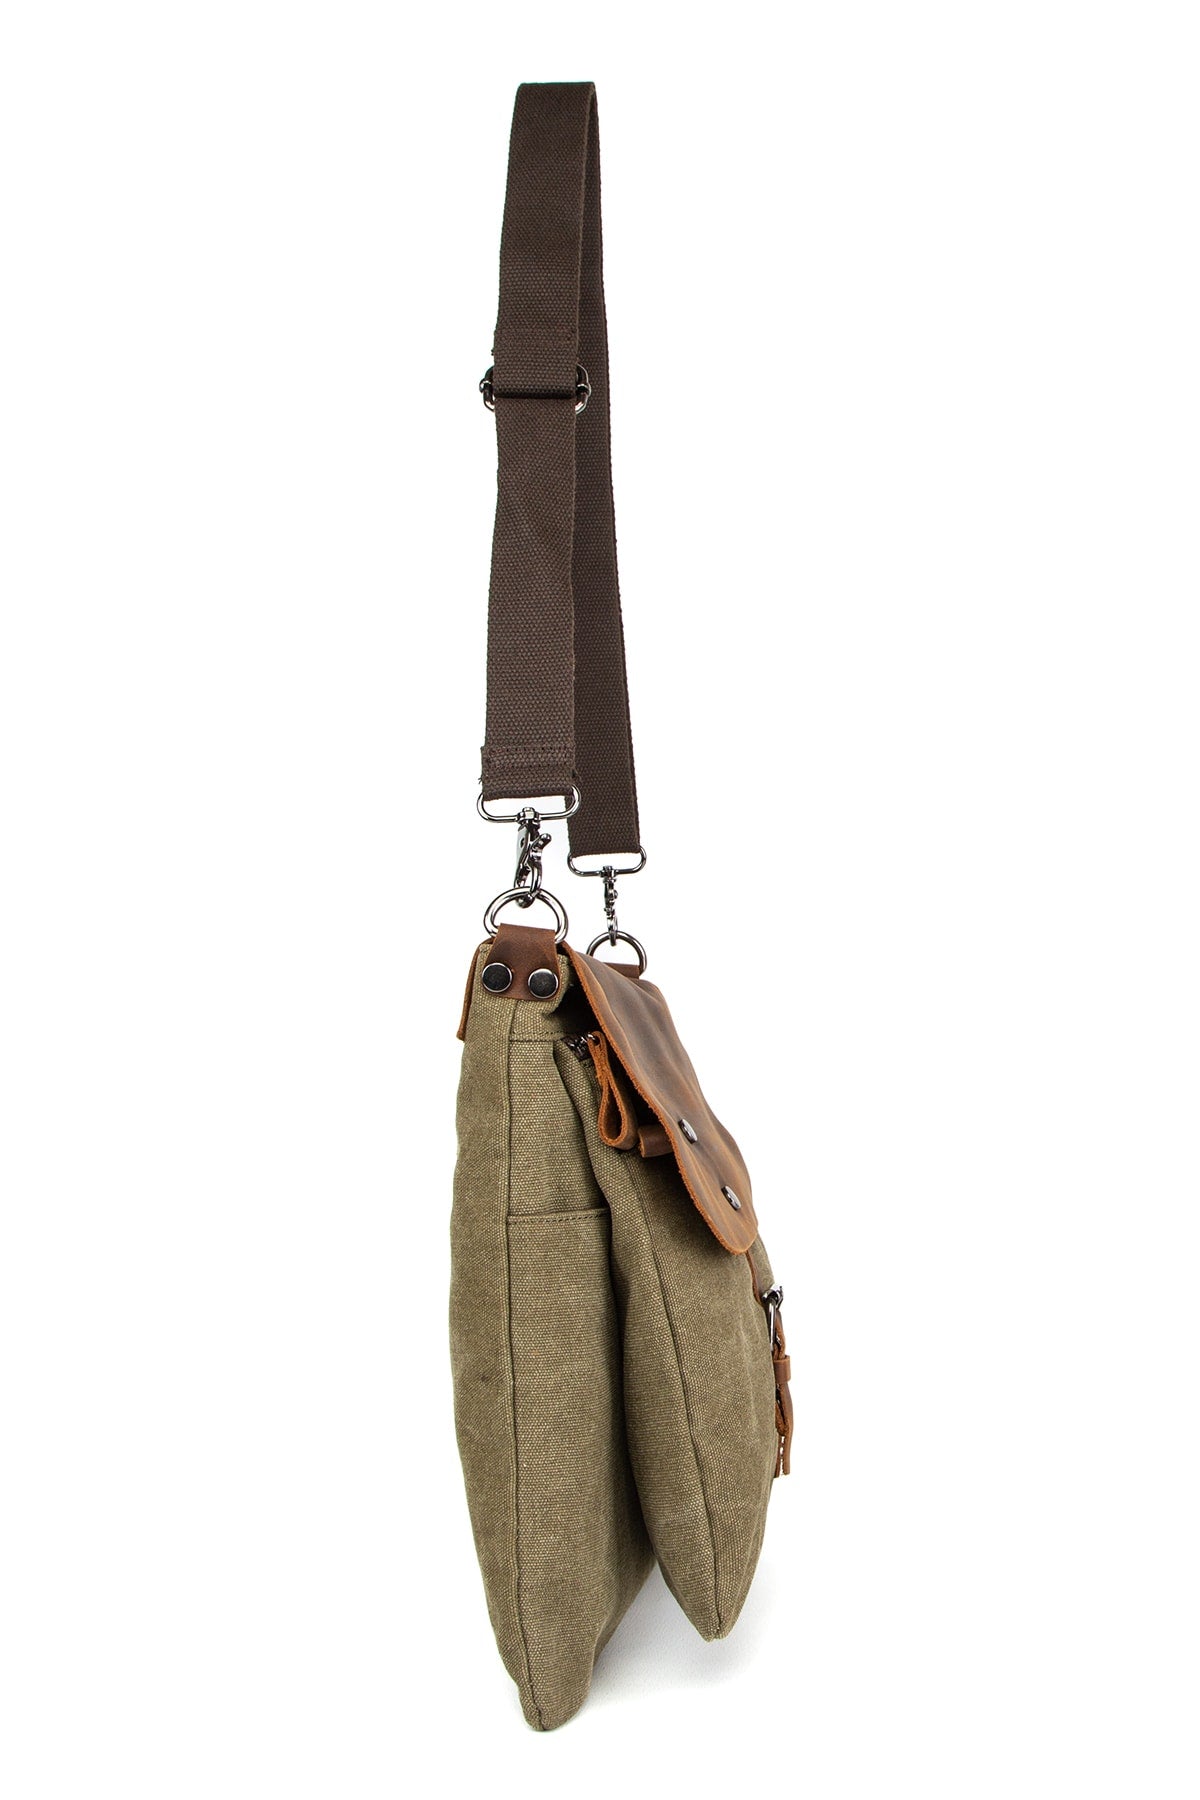 Cross the Borders with the Multifunctional Canvas Messenger Bag Khaki